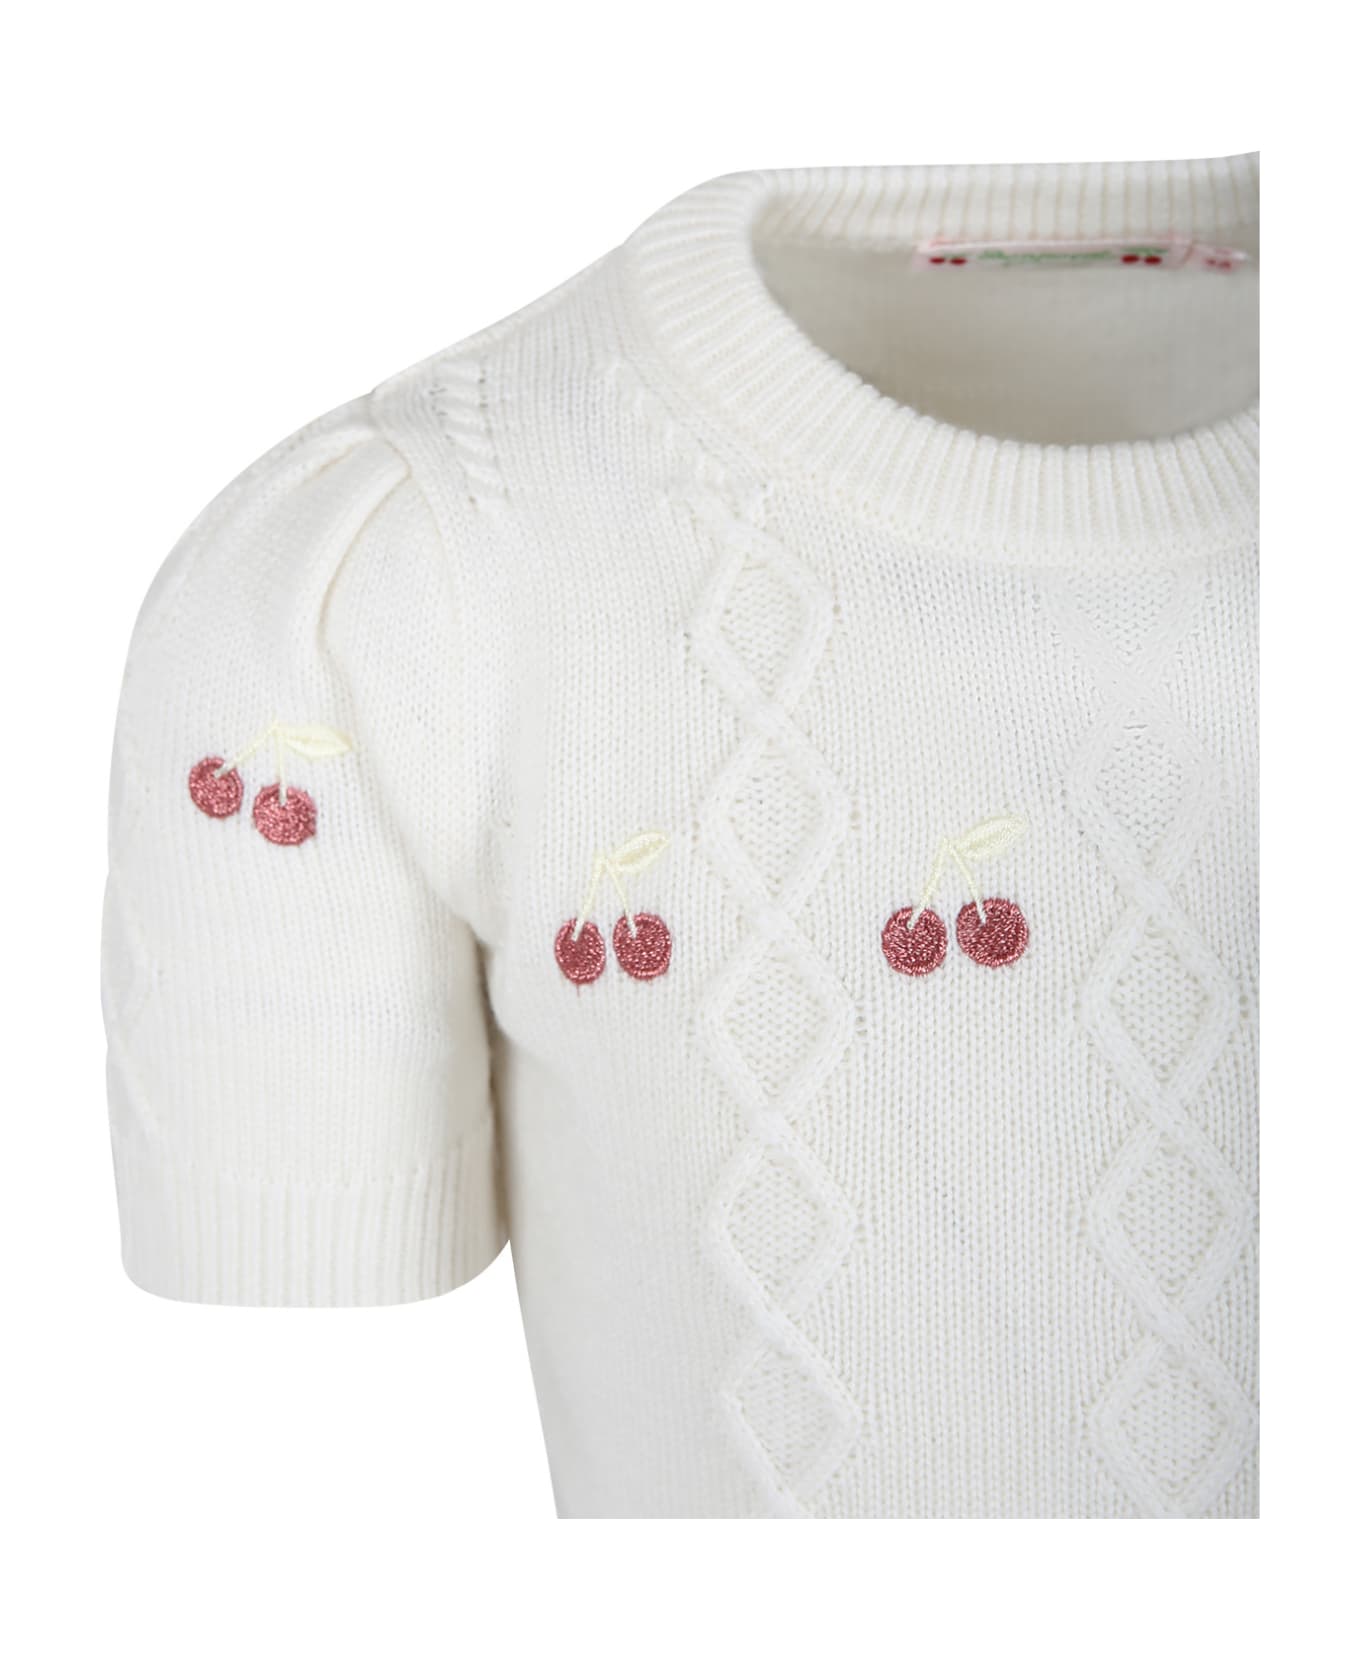 Bonpoint White Sweater For Girl With Cherries - White